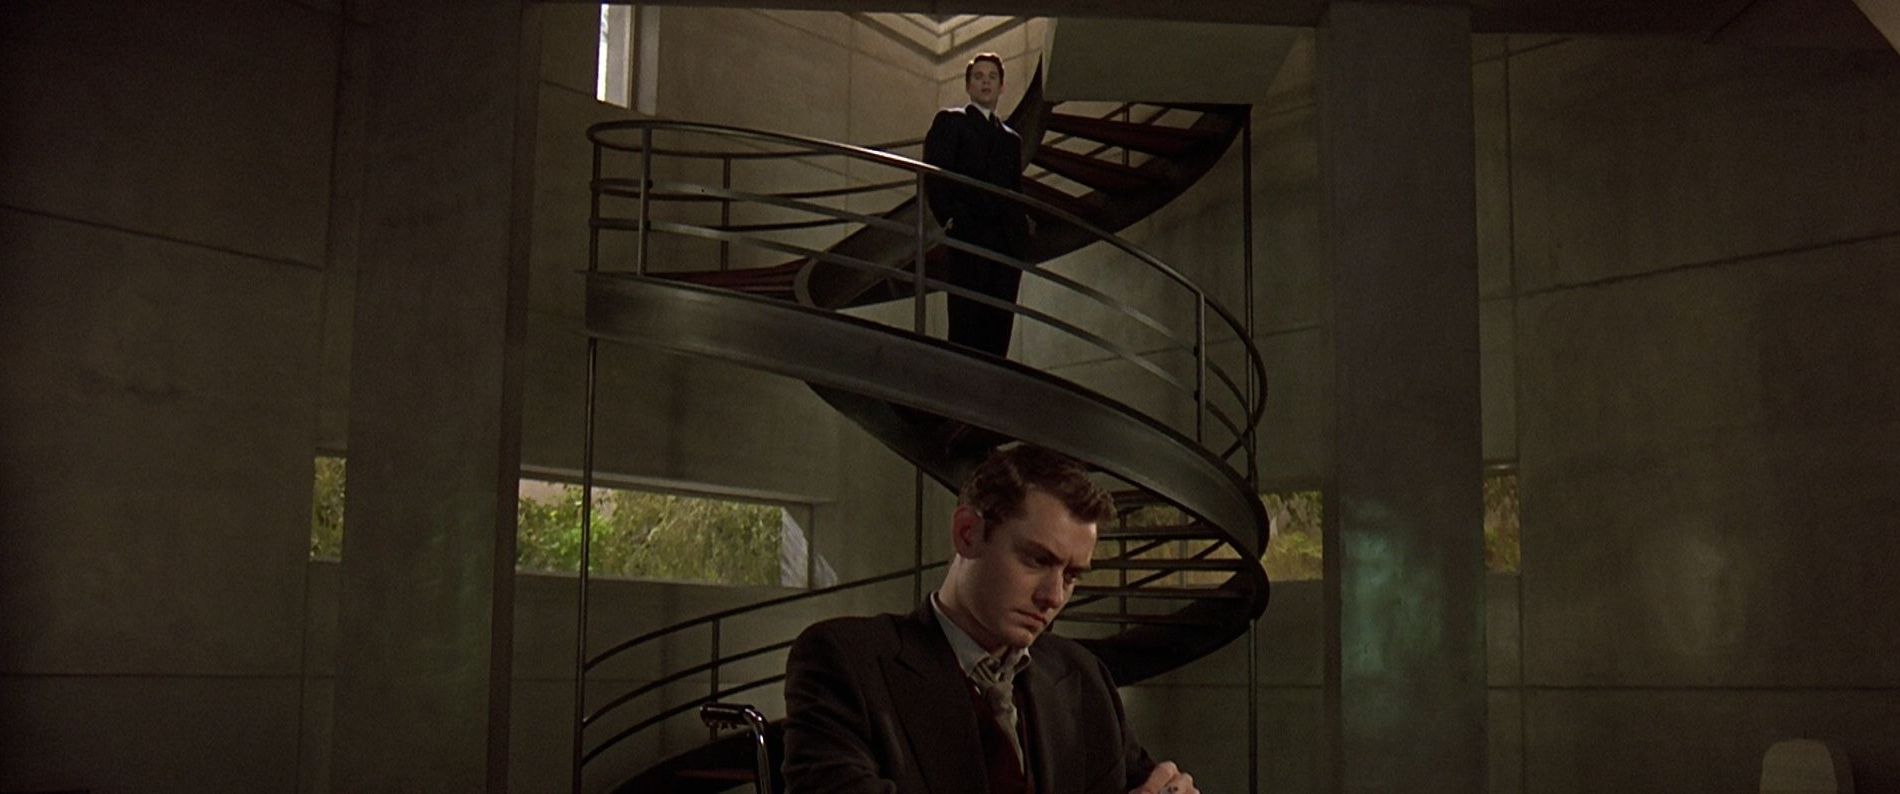 The spiral staircase in Gattaca is a double helix, the shape of a DNA molecule.